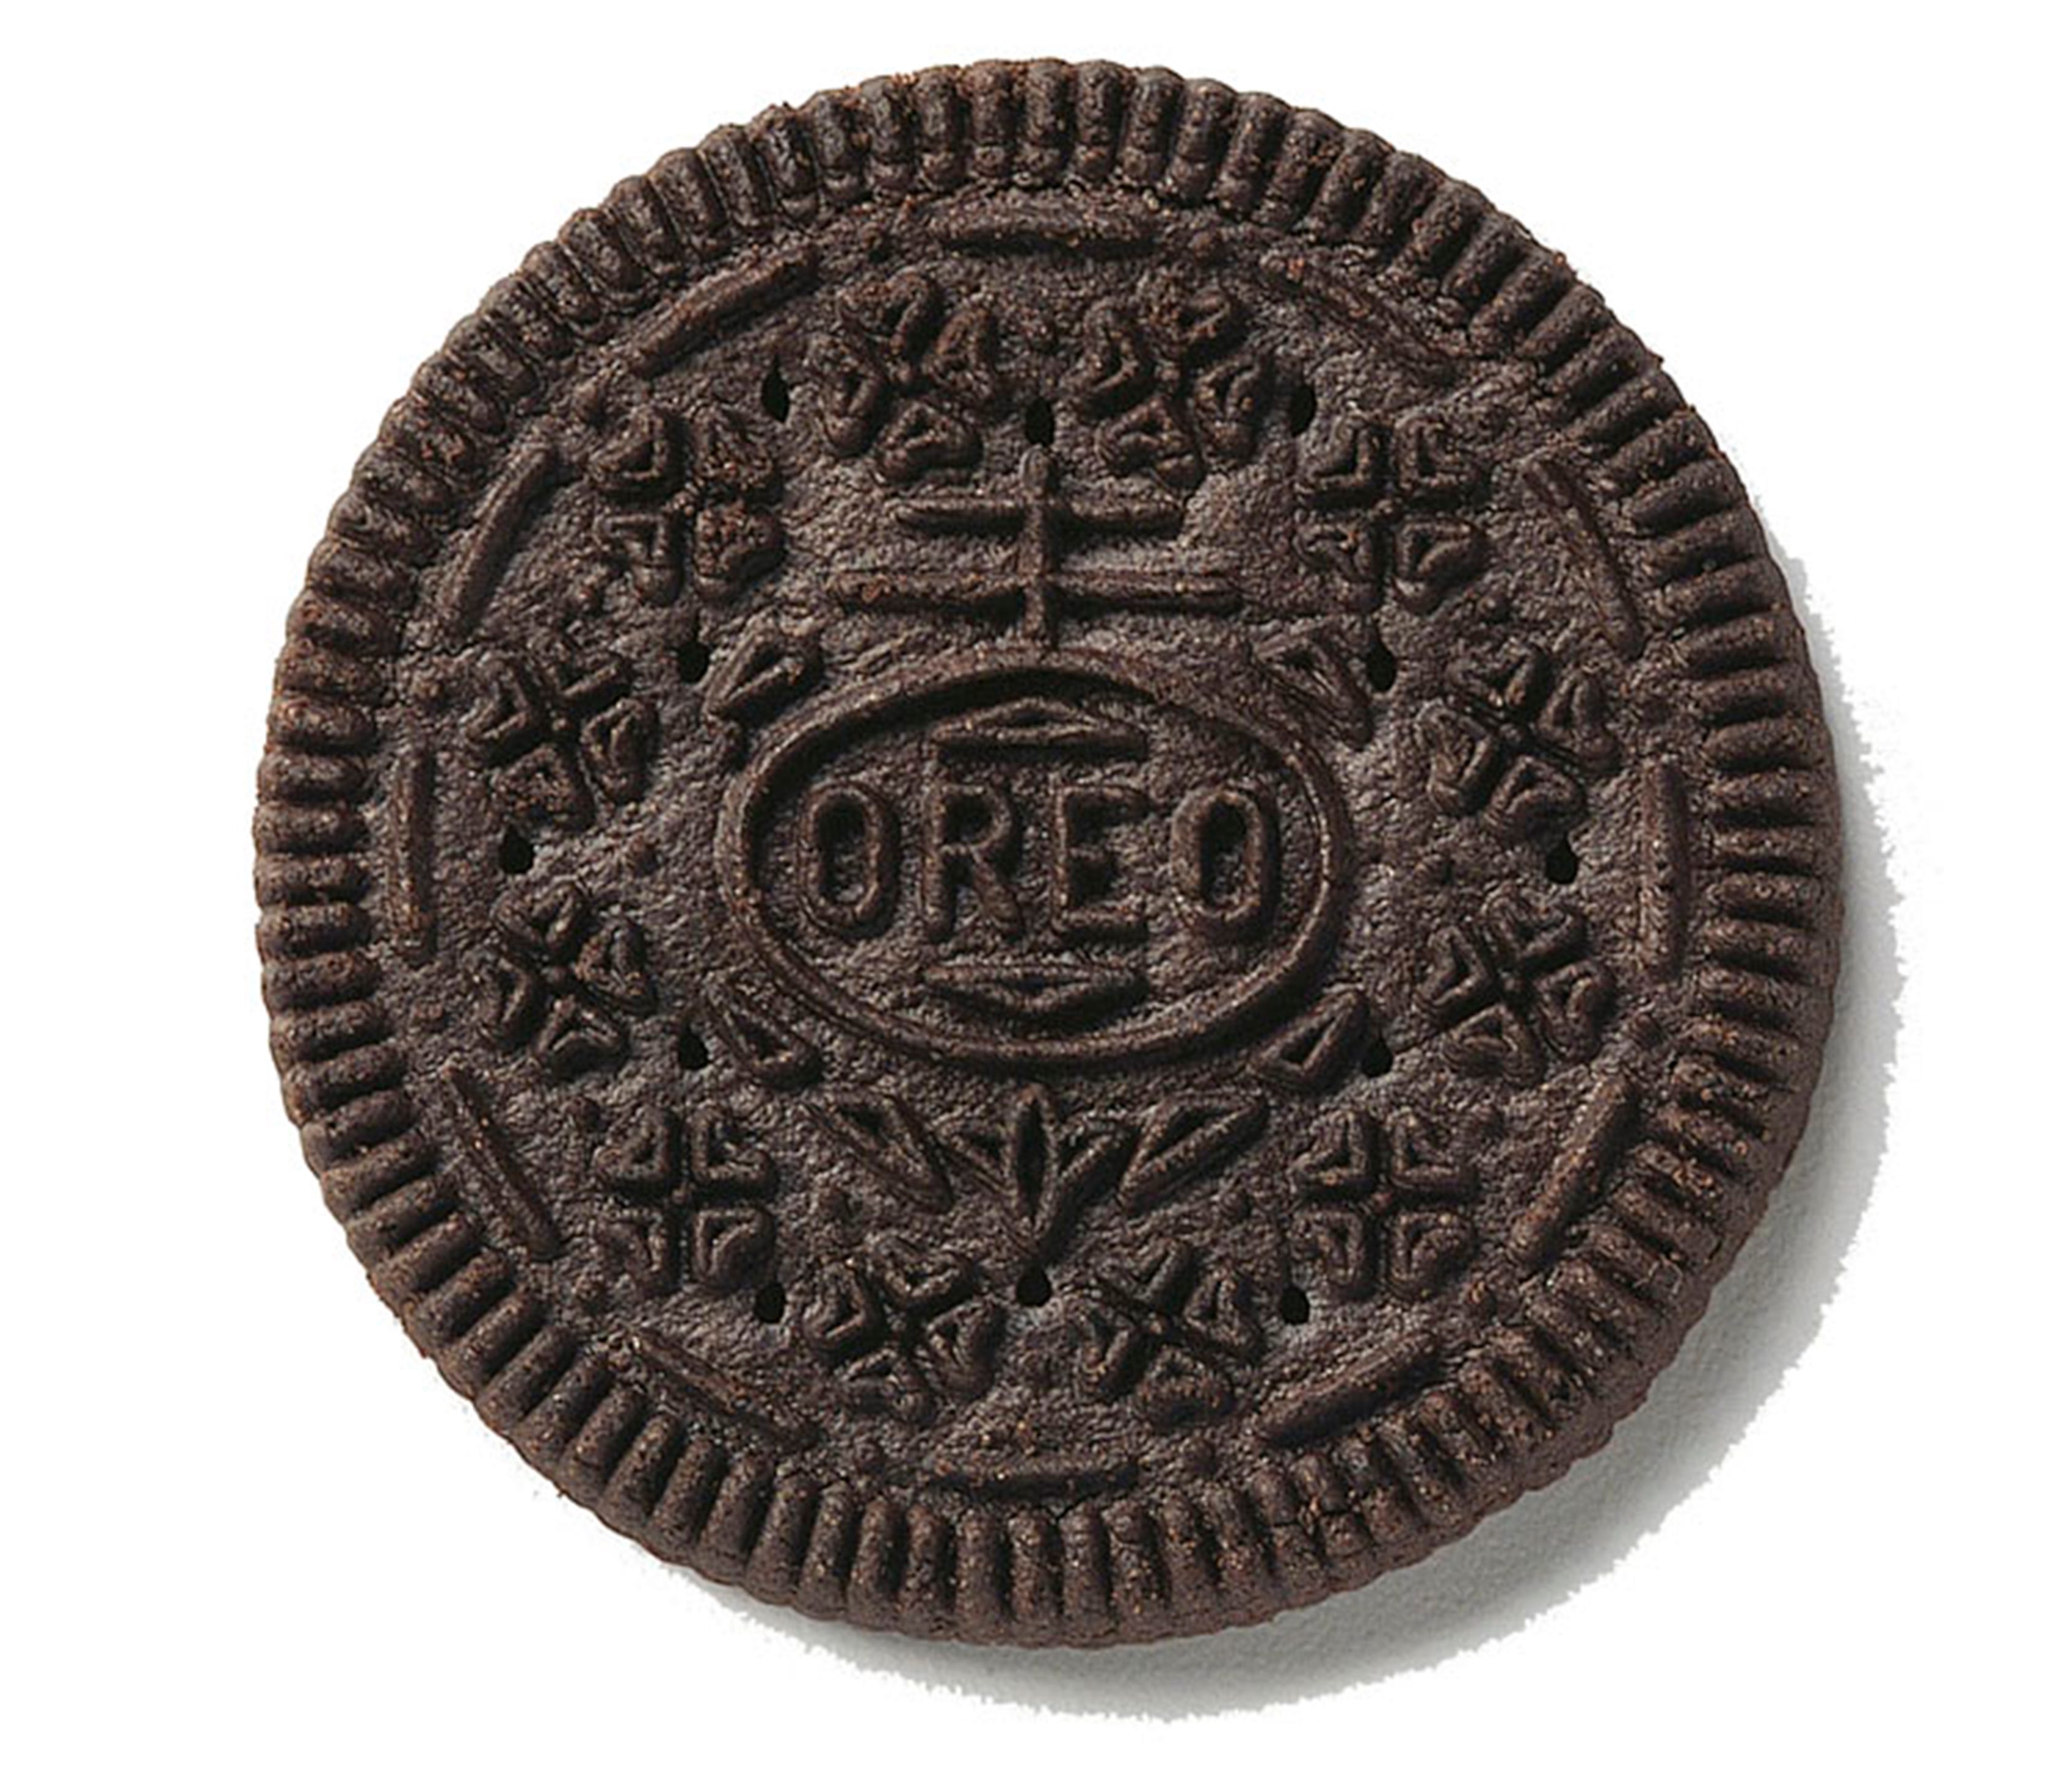 For those who think the original Oreo is too dull, Nabisco is offering $500,000 to the winner of its next Oreo flavor.